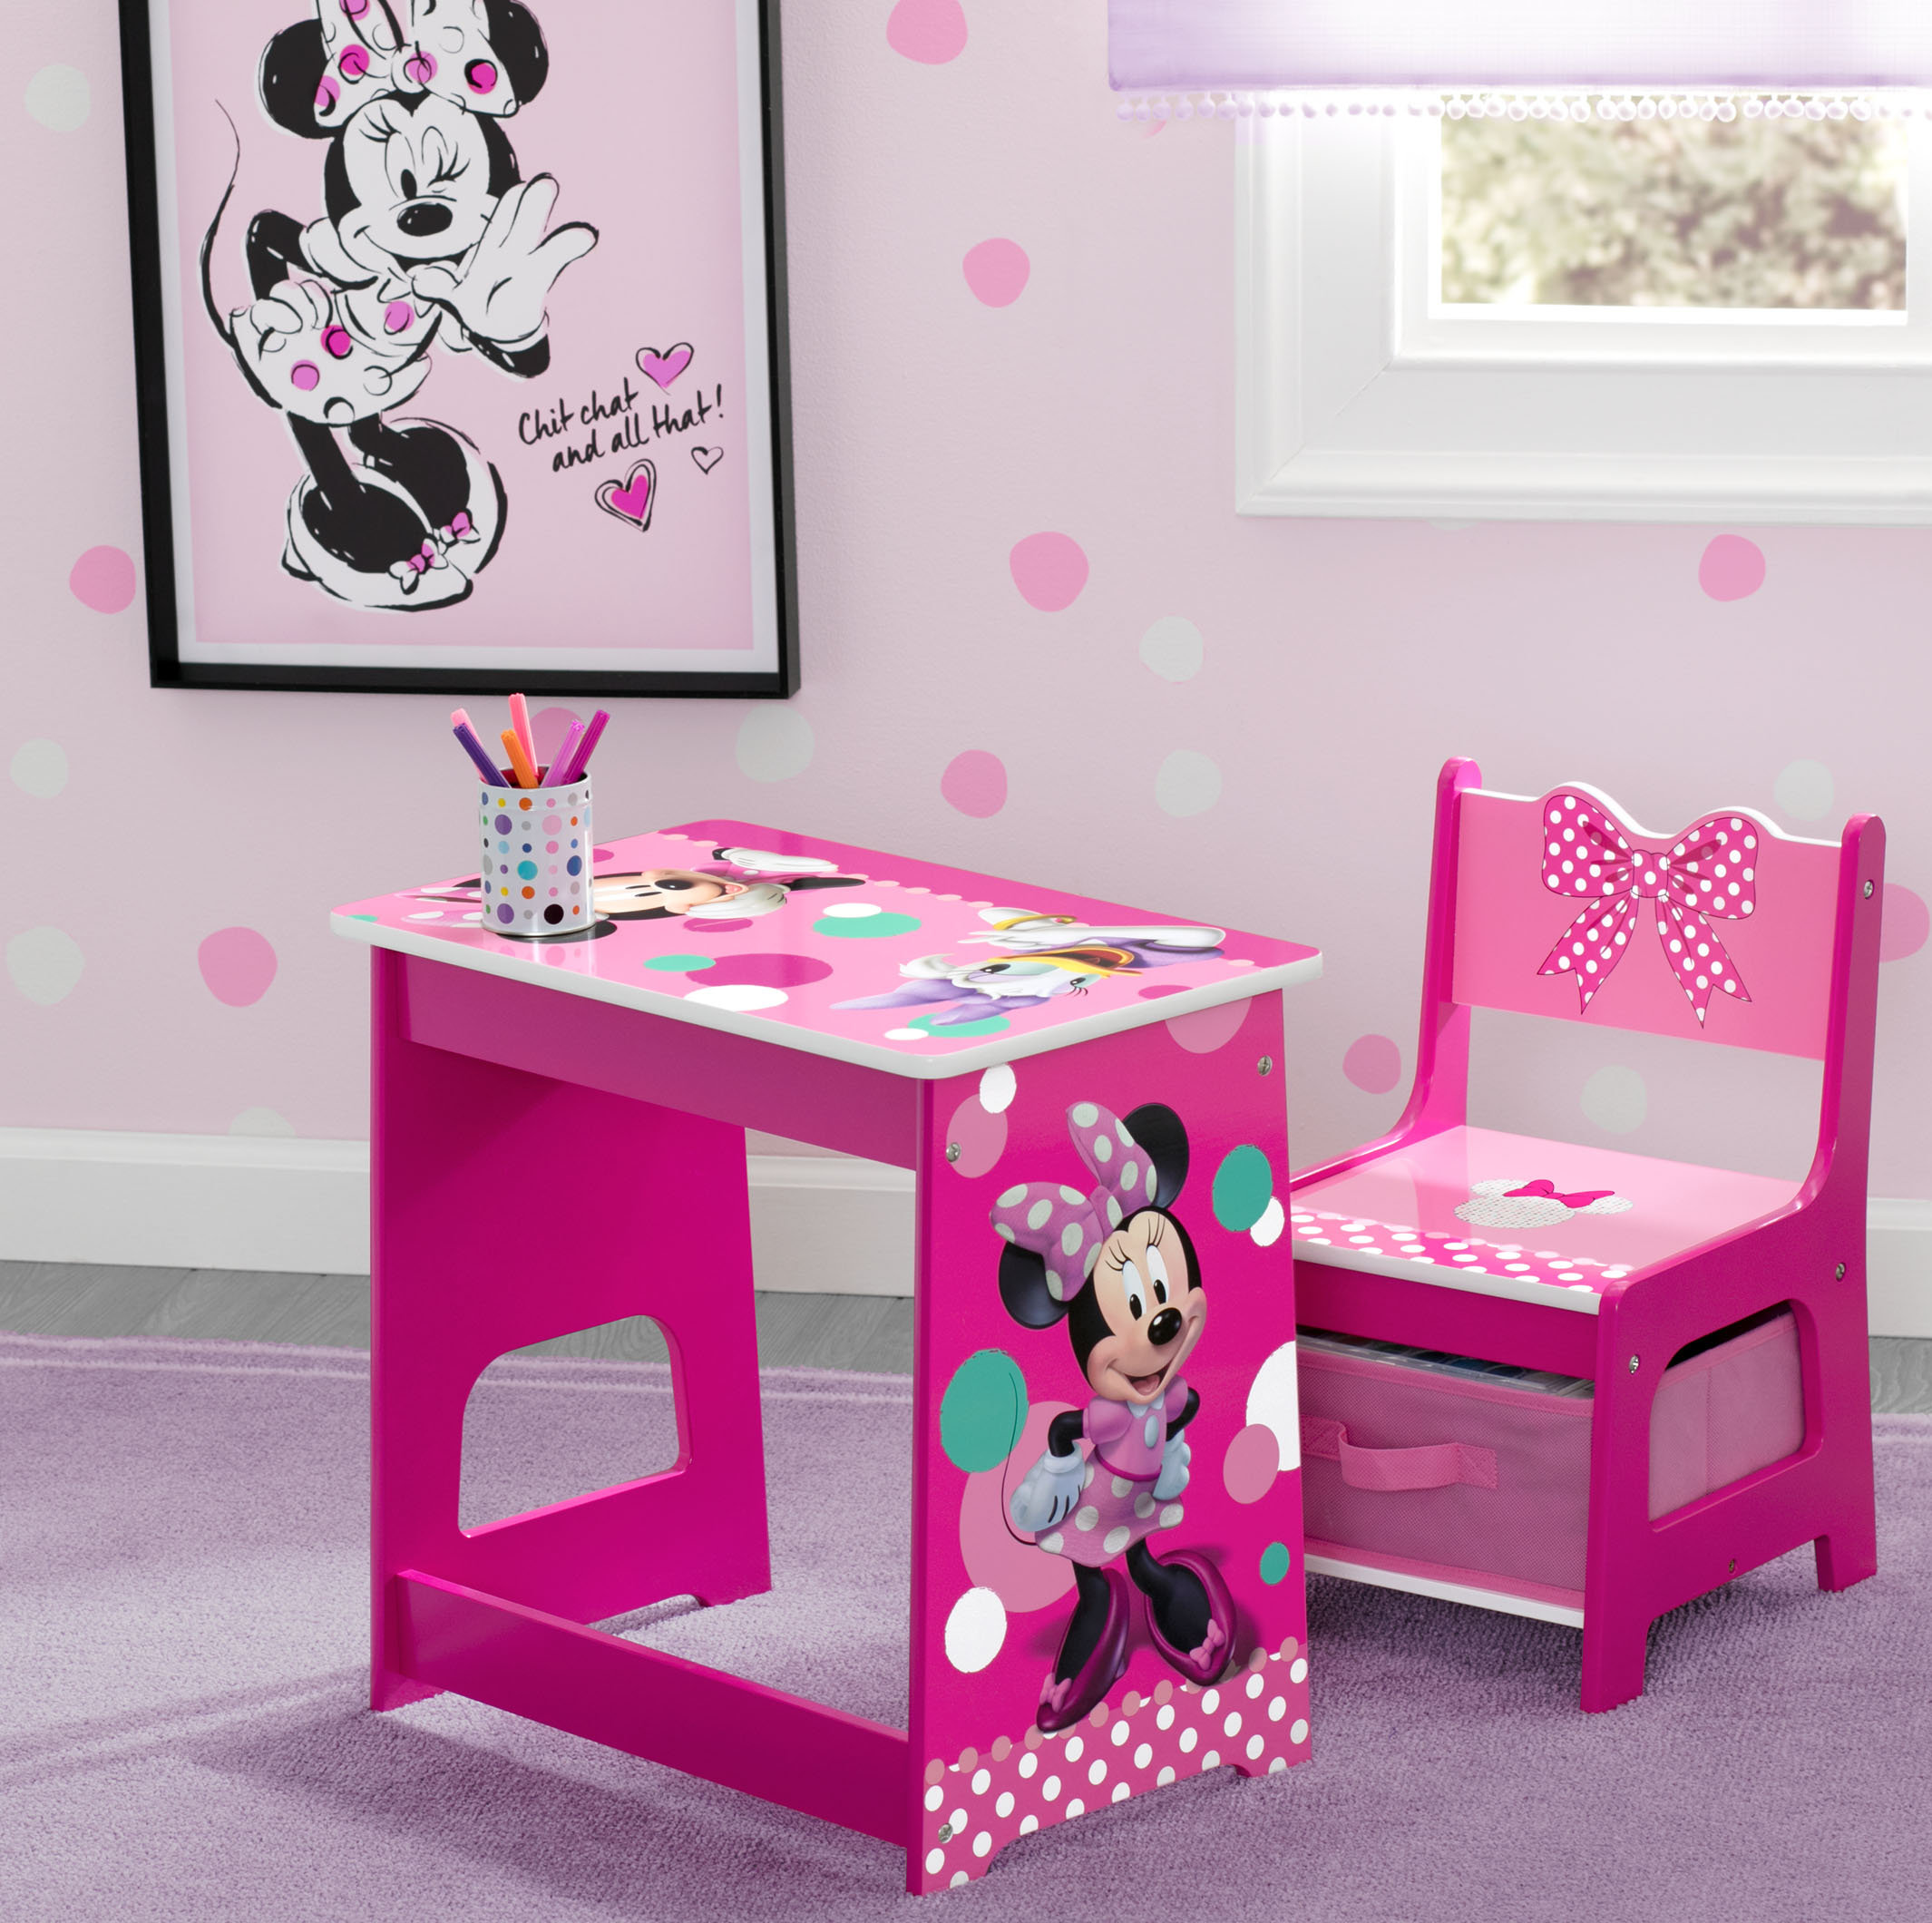 minnie mouse kids table and chairs